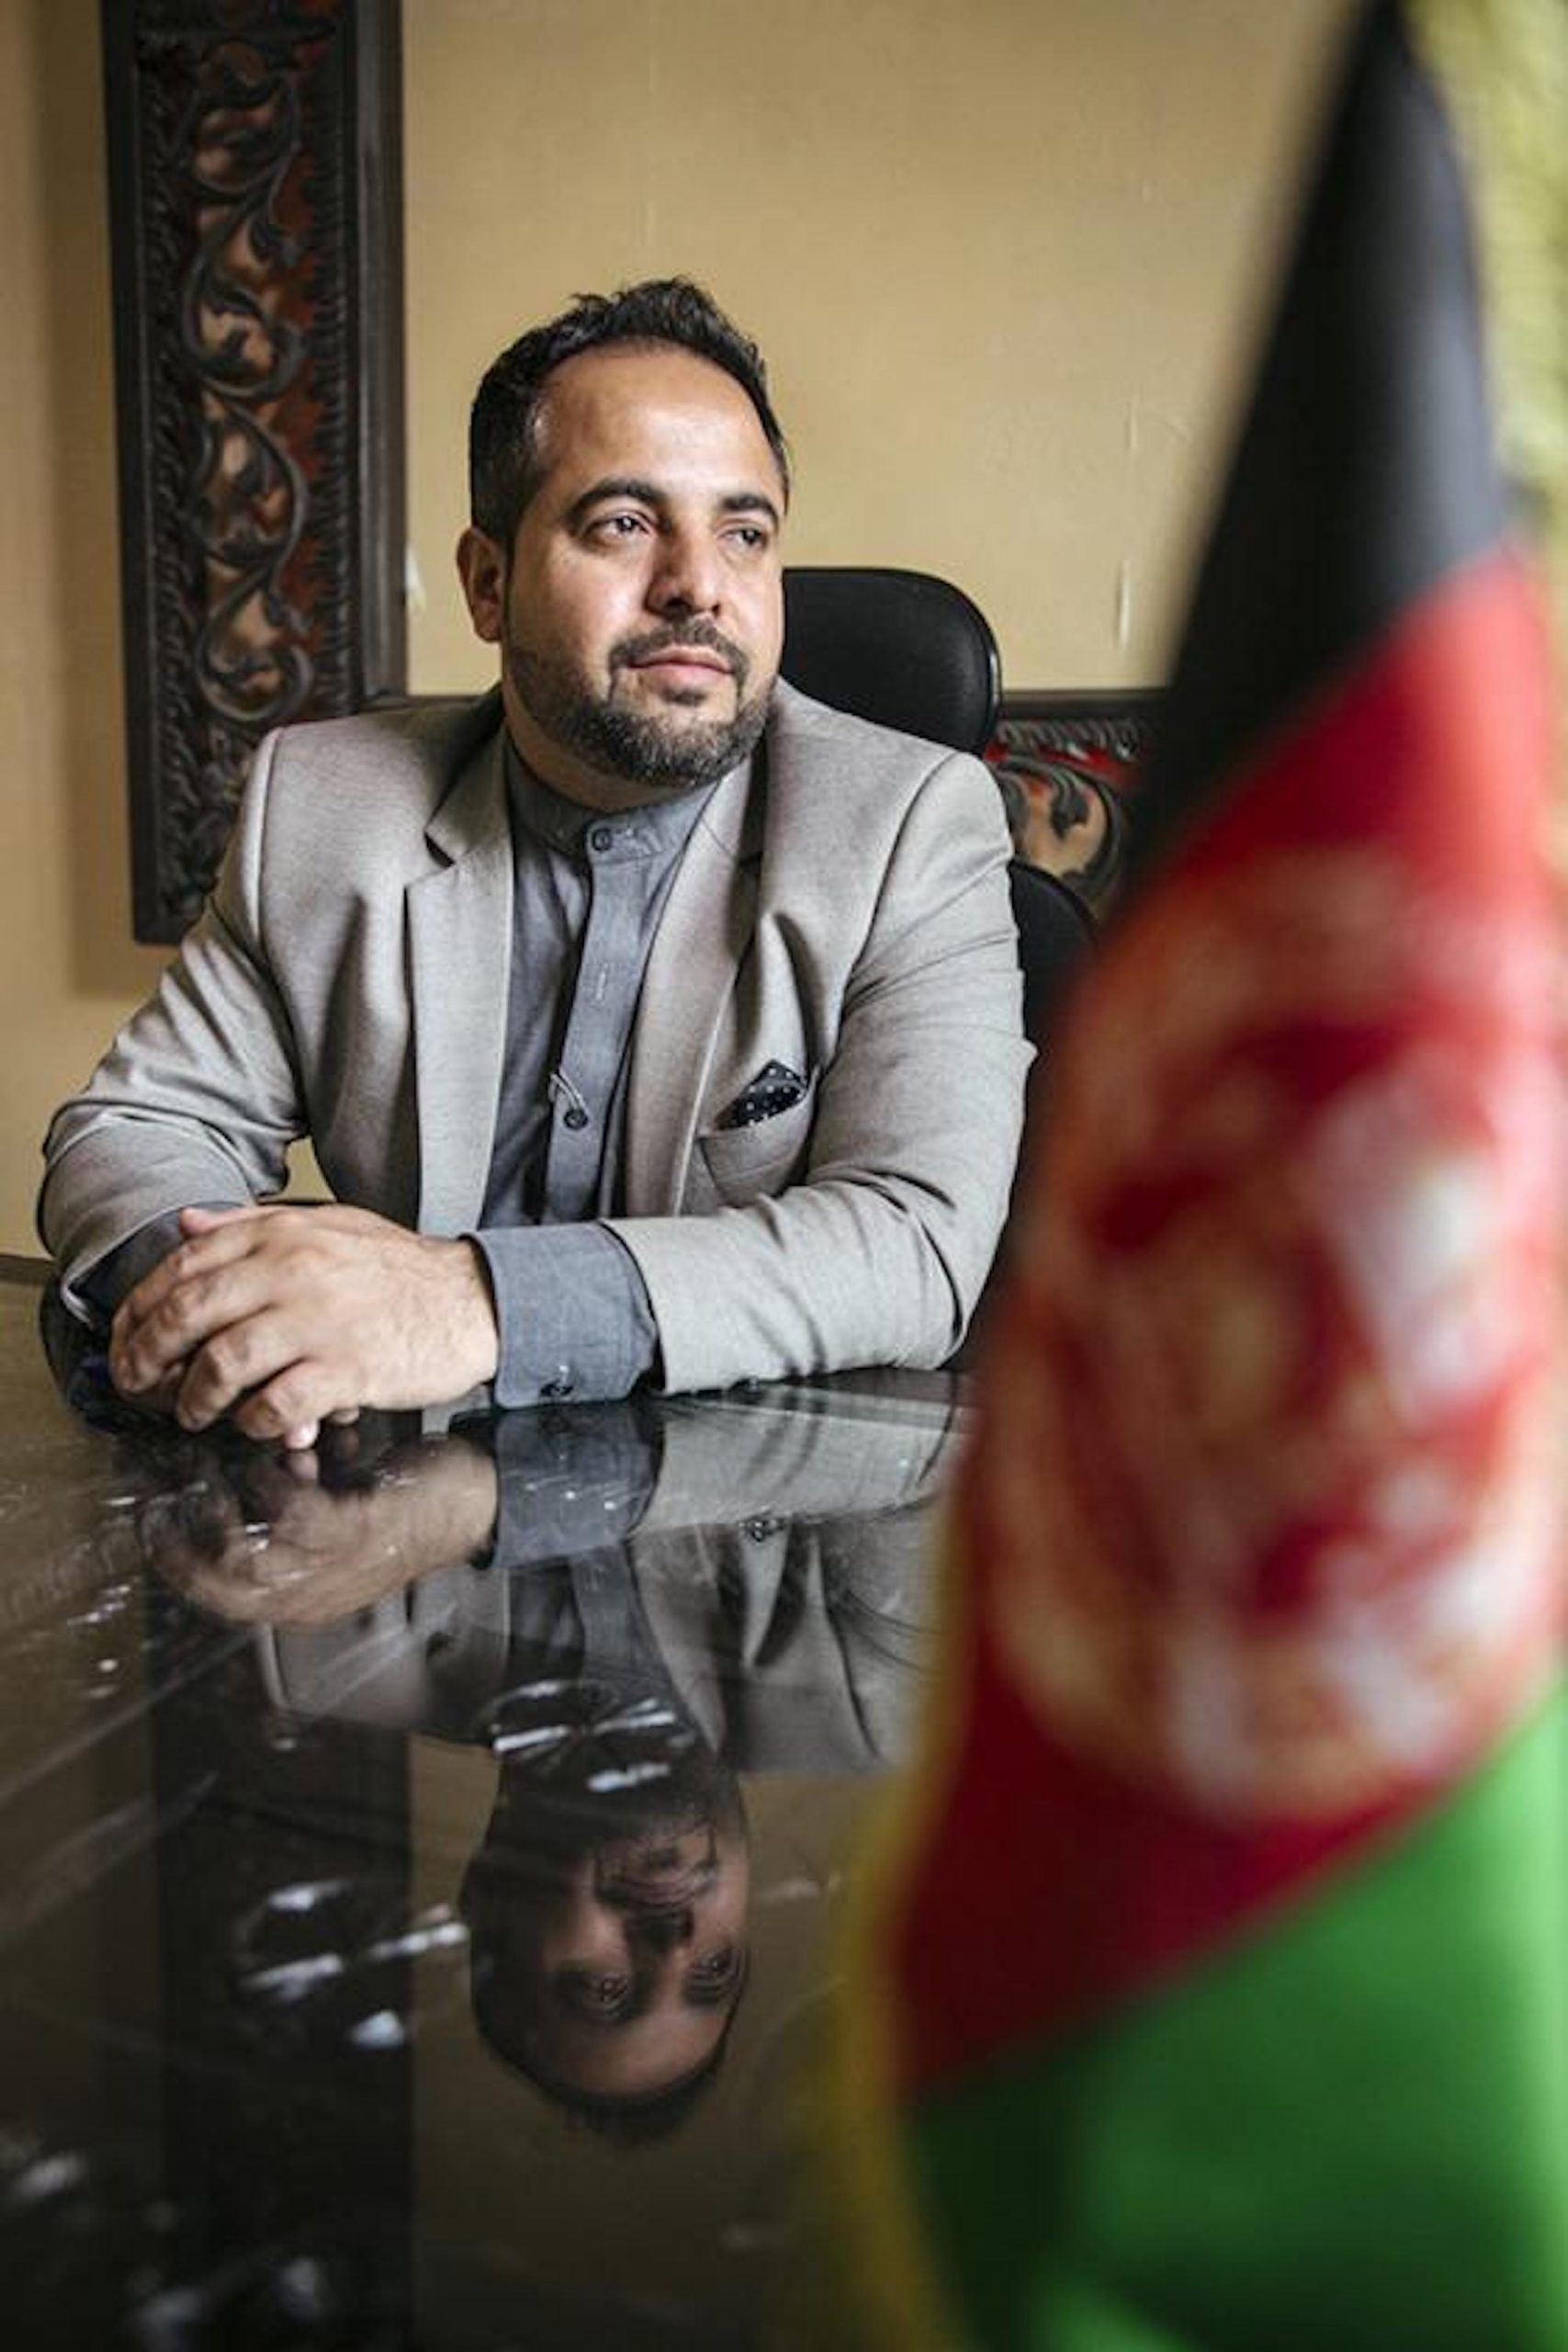 Hamid Samar sitting at a table, with the flag of Afghanistan in the foreground.